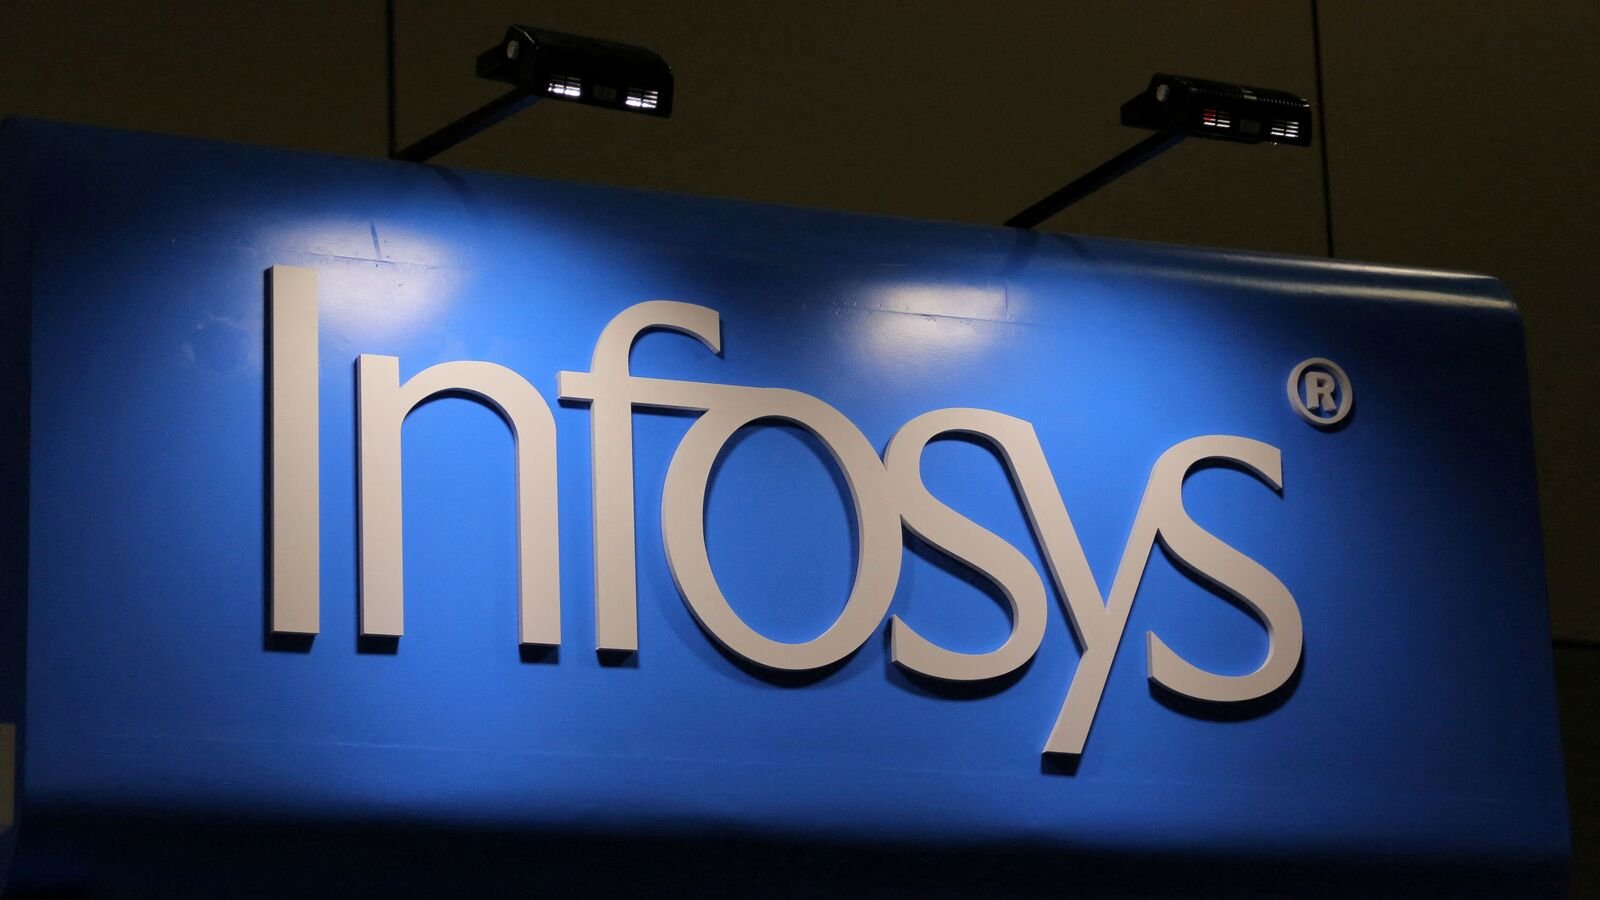 Infosys Q4 results preview: Revenue expected to fall on weak discretionary spending, margin to remain flat QoQ